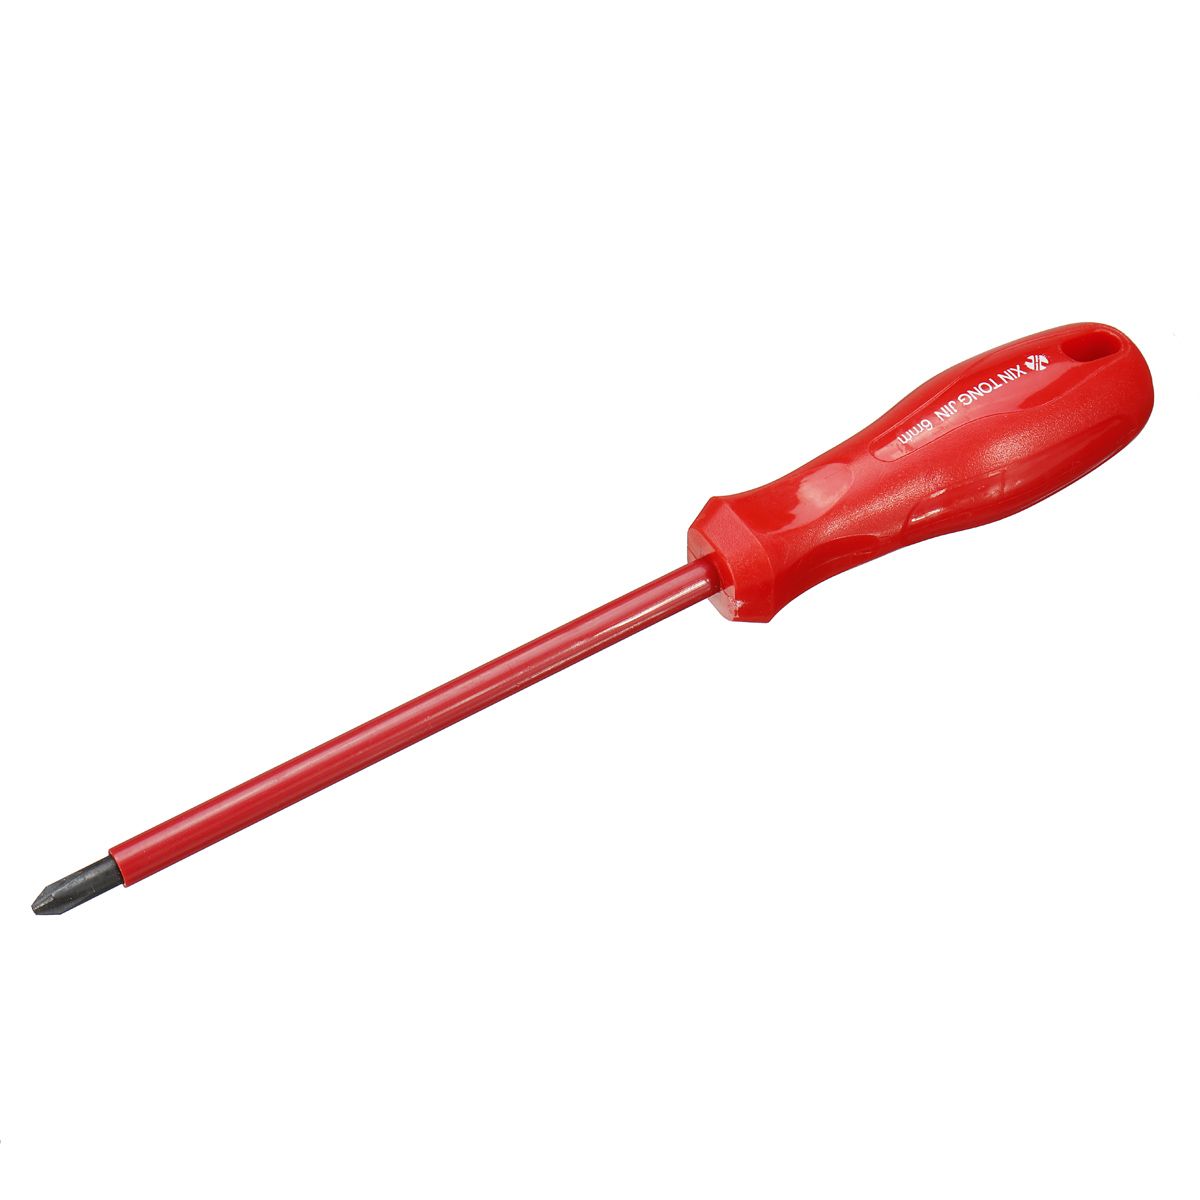 1000V-Electronic-Insulated-Hand-Screwdriver-Repair-Tool-1633166